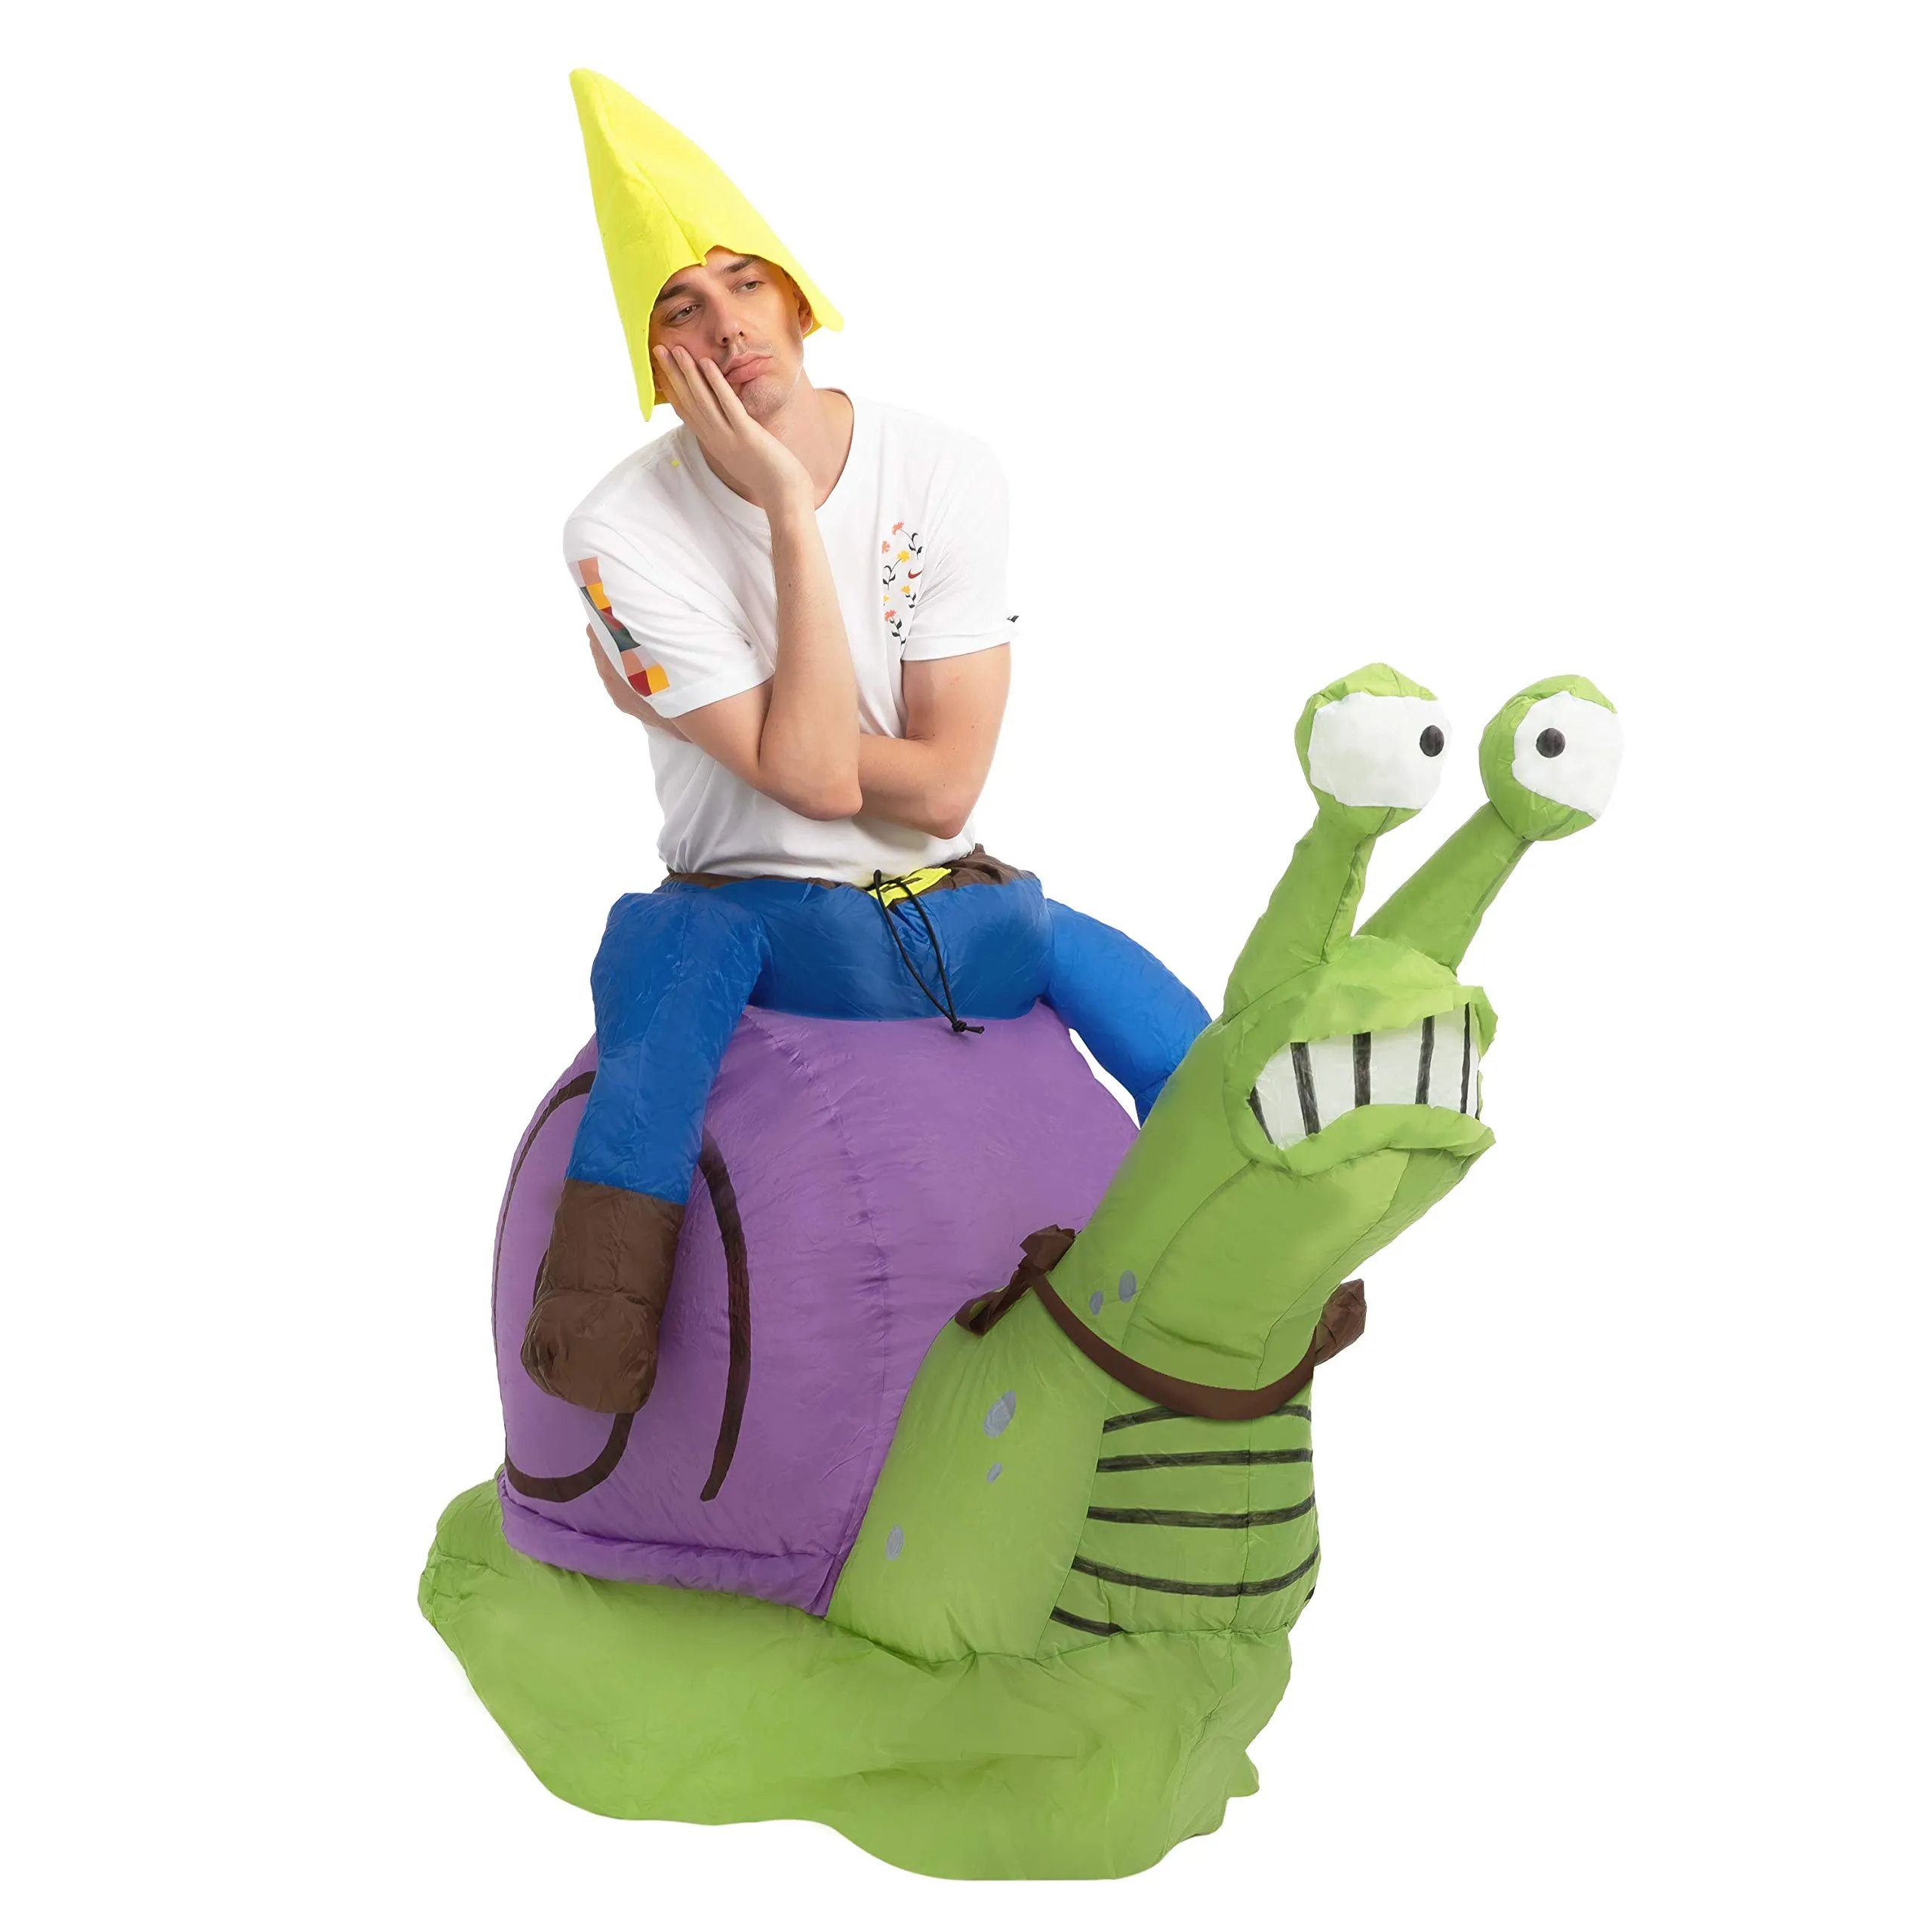 You are currently viewing How Do I Repair A Puncture Or Leak in an Inflatable Costume?